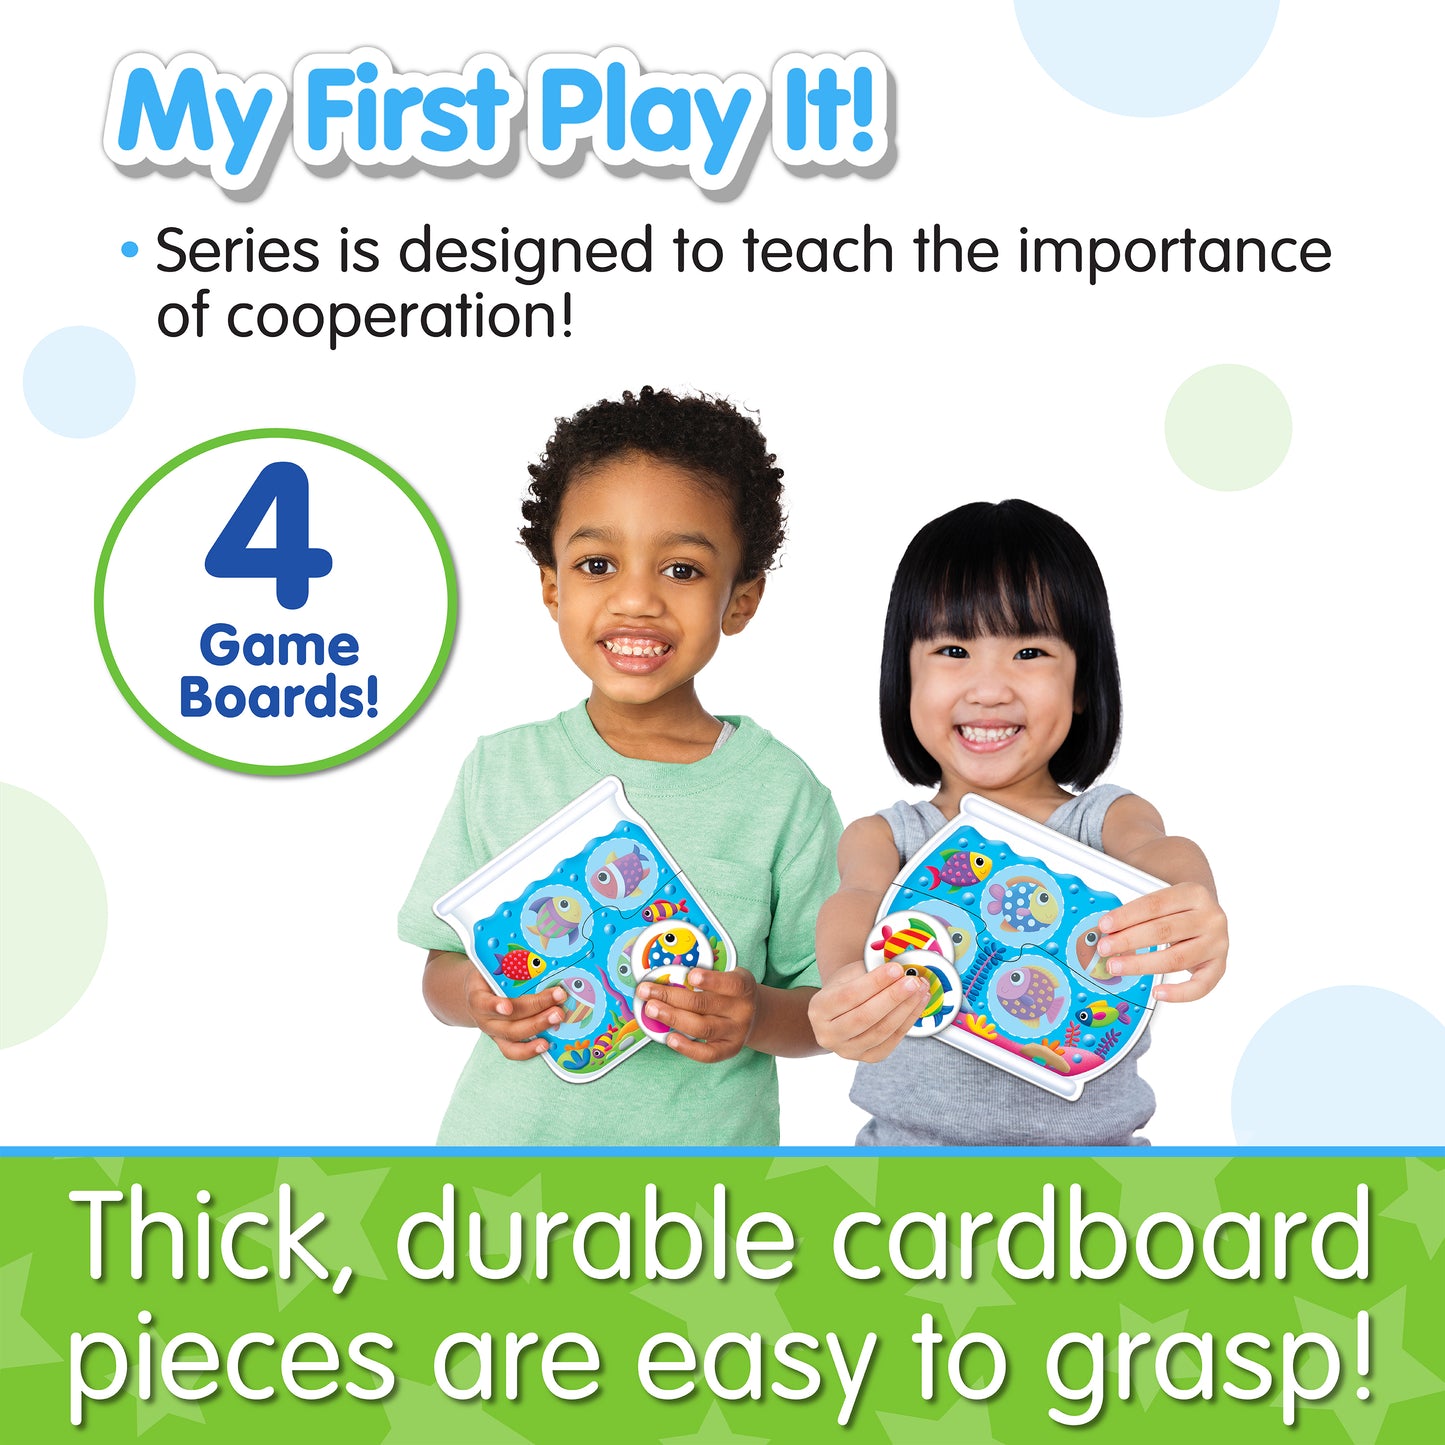 Infographic about My First Play It - Match My Fish's features that says, "Thick, durable cardboard pieces are easy to grasp!"